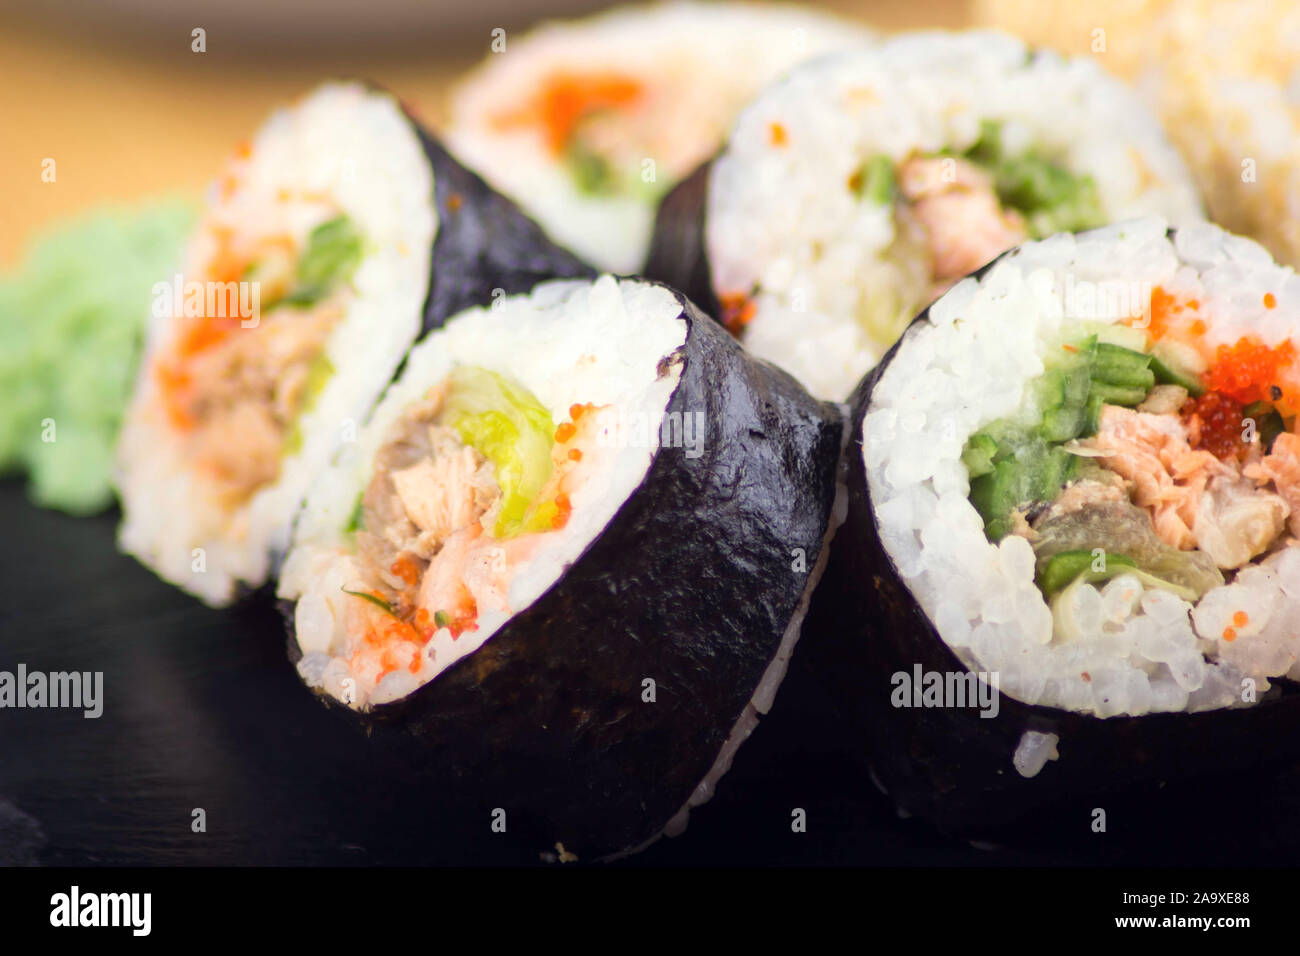 Mix of sushi rolls served on a plate in a restaurant. Japanese food Stock Photo